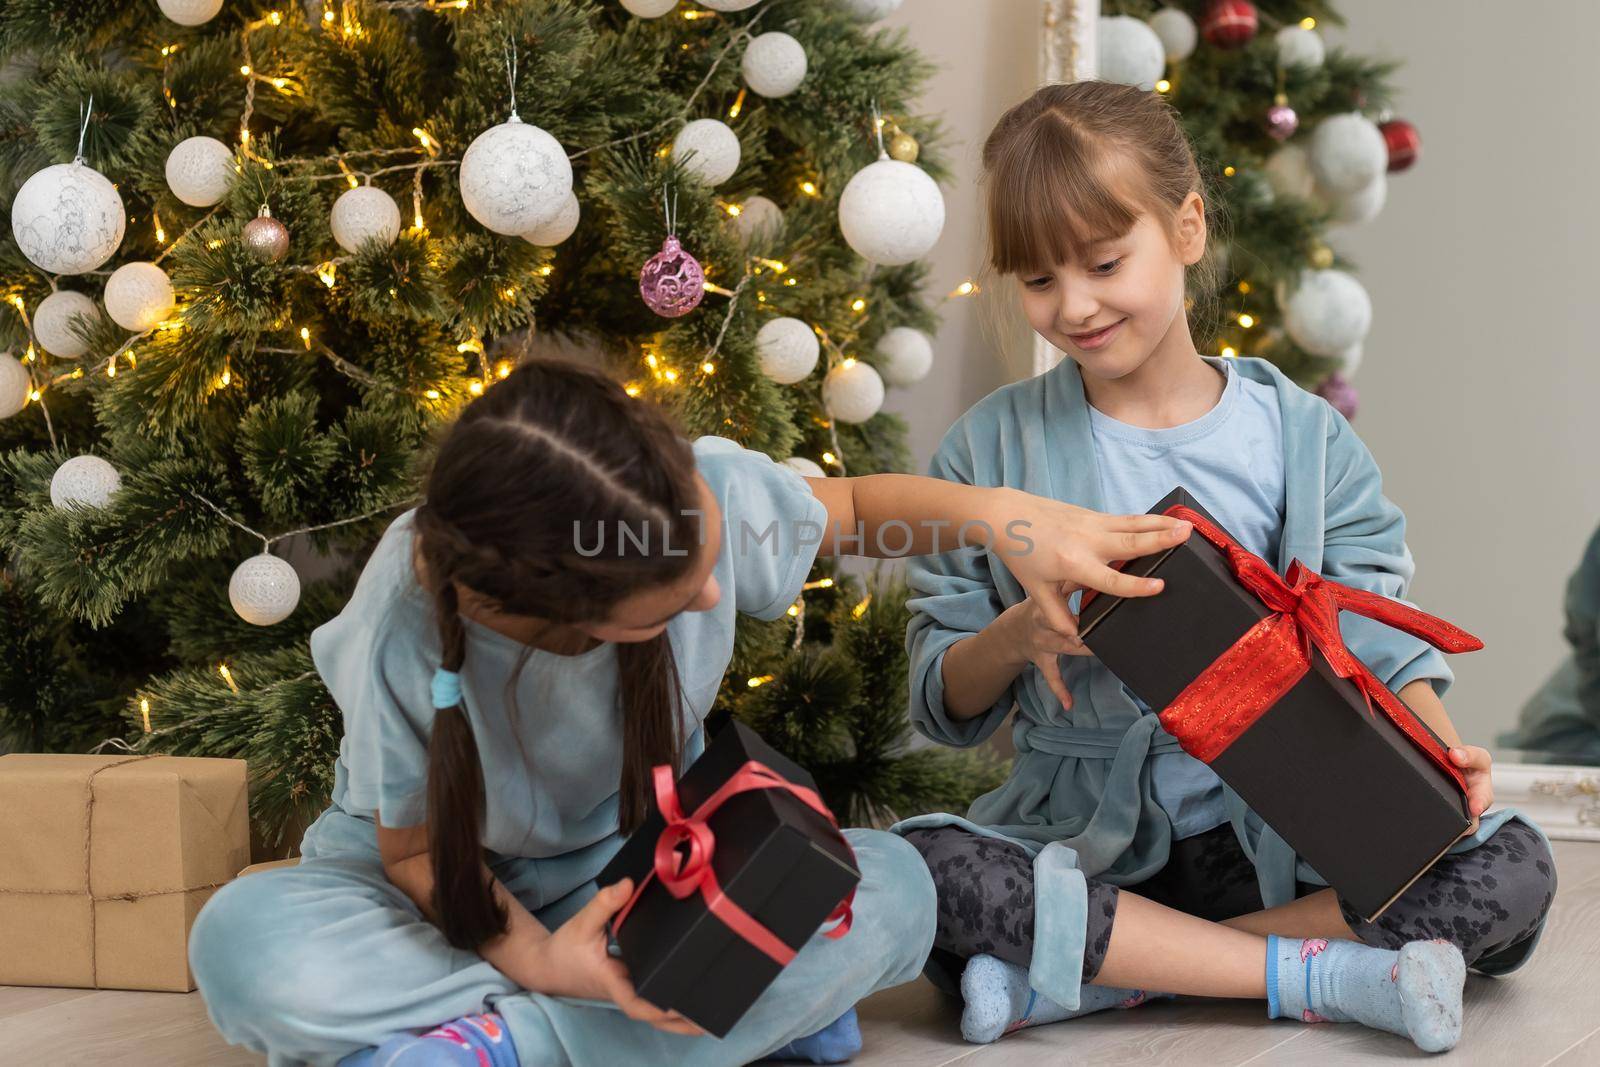 two little girls with presents around the Christmas tree